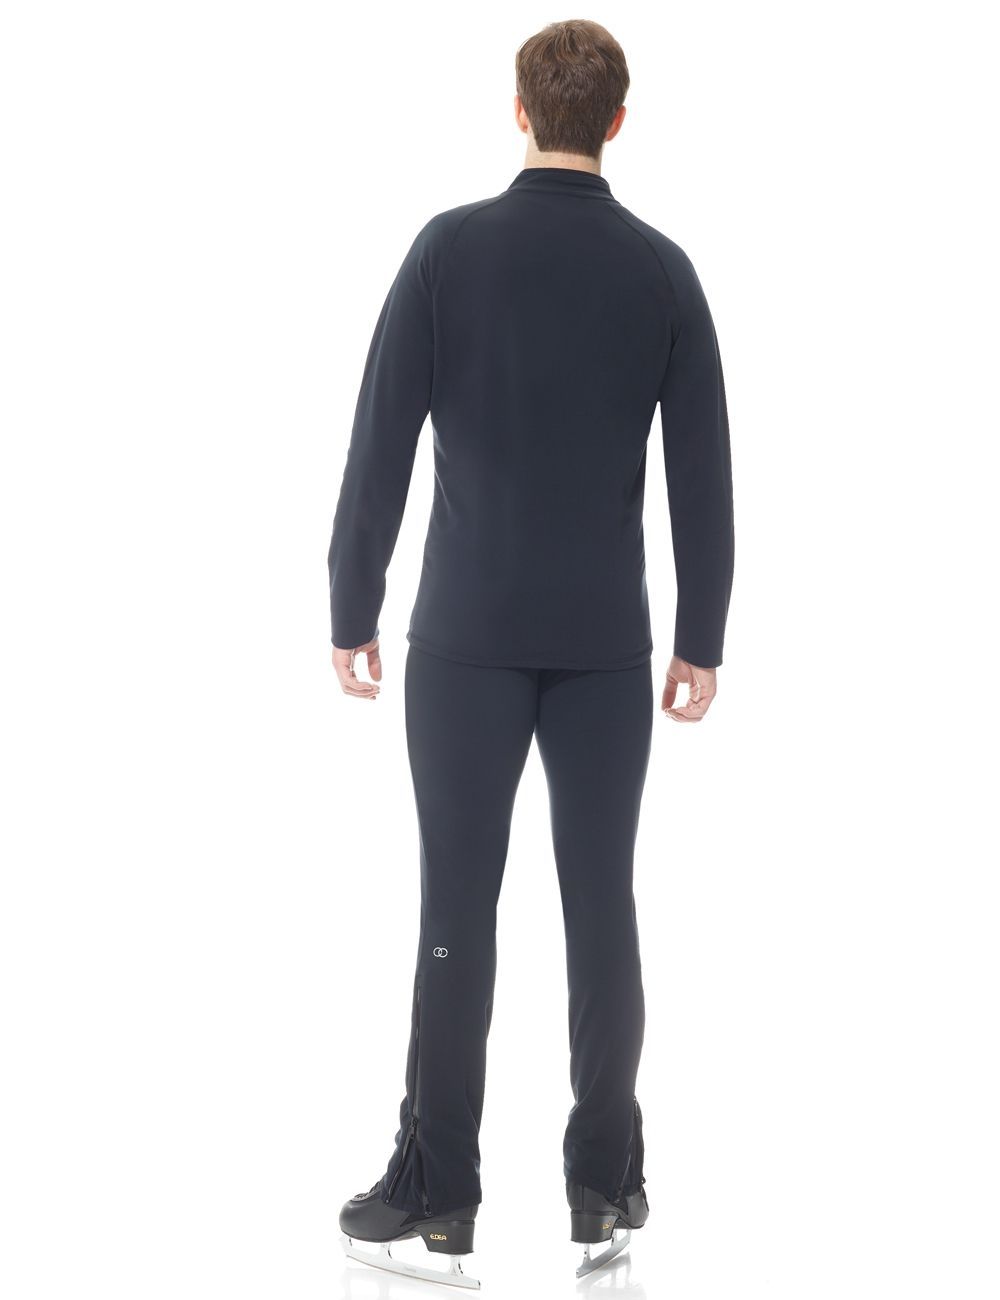 Best price on Mondor 747 Mens and boys Figure Skating Pants for practice,  testing and figure skating competition wear. Great for Irish Dance too!